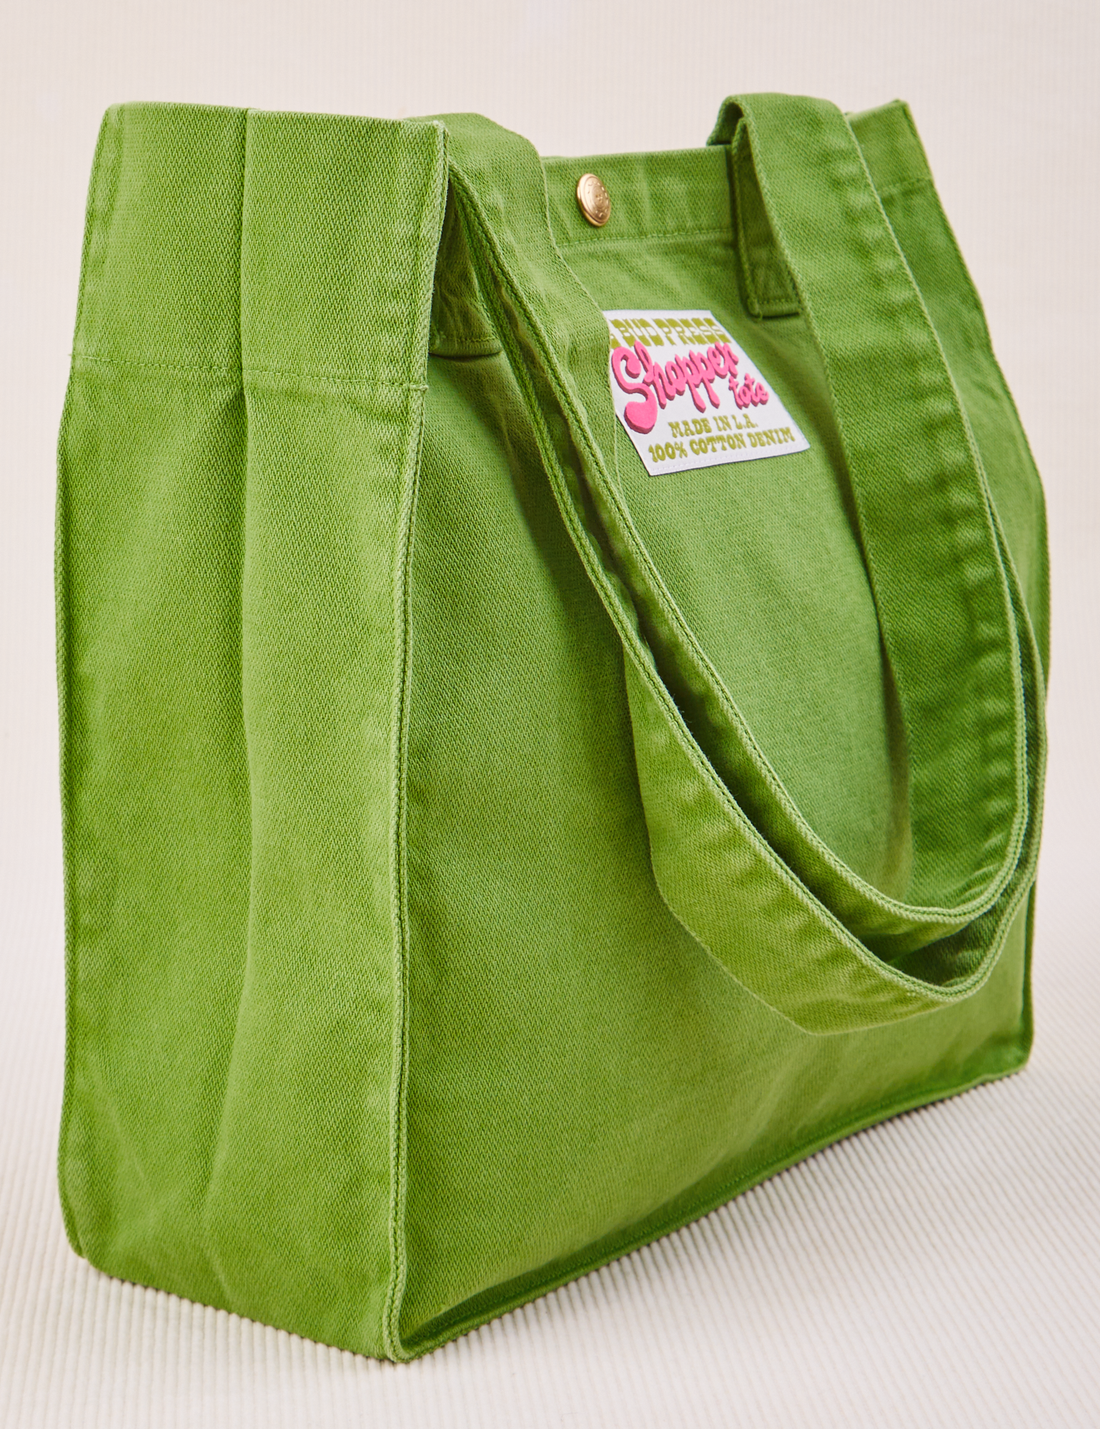 Angled view of Shopper Tote Bag in Bright Olive